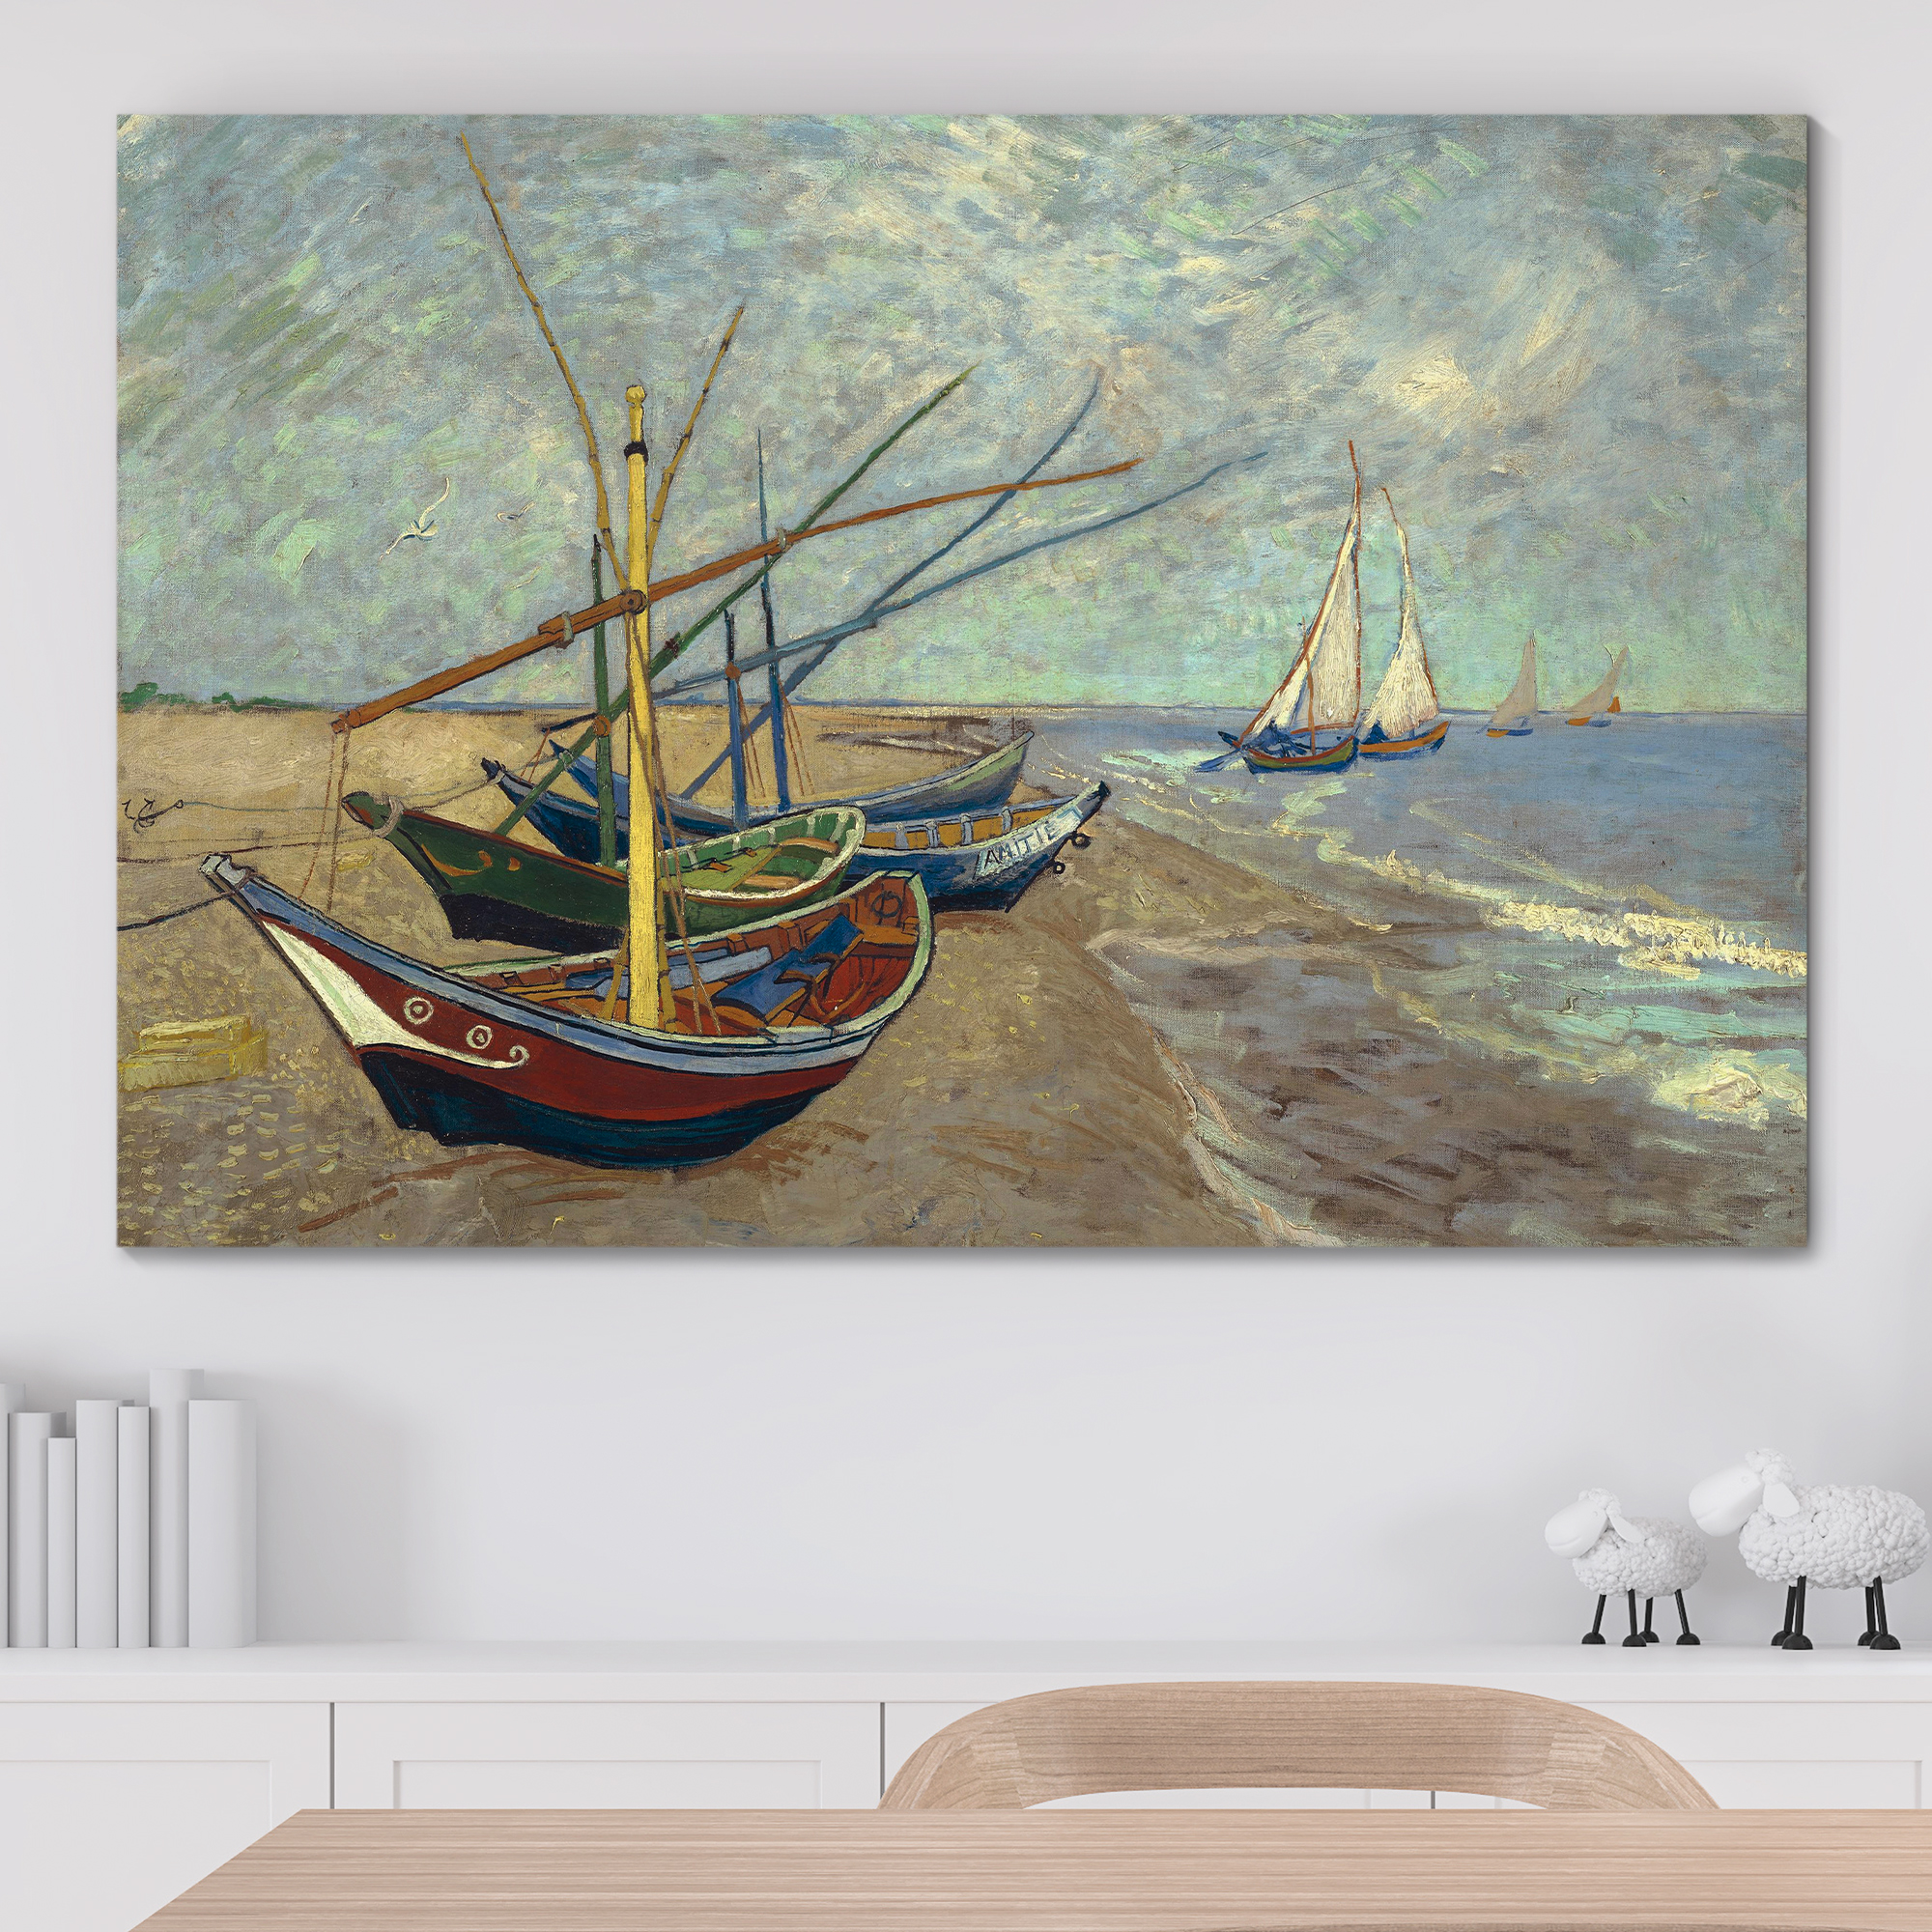 Fishing Boats on the Beach at Les Saintes-Maries-de-la-Mer by Vincent Van Gogh - Oil Painting Reproduction on Canvas Prints Wall Art, Ready to Hang - 24